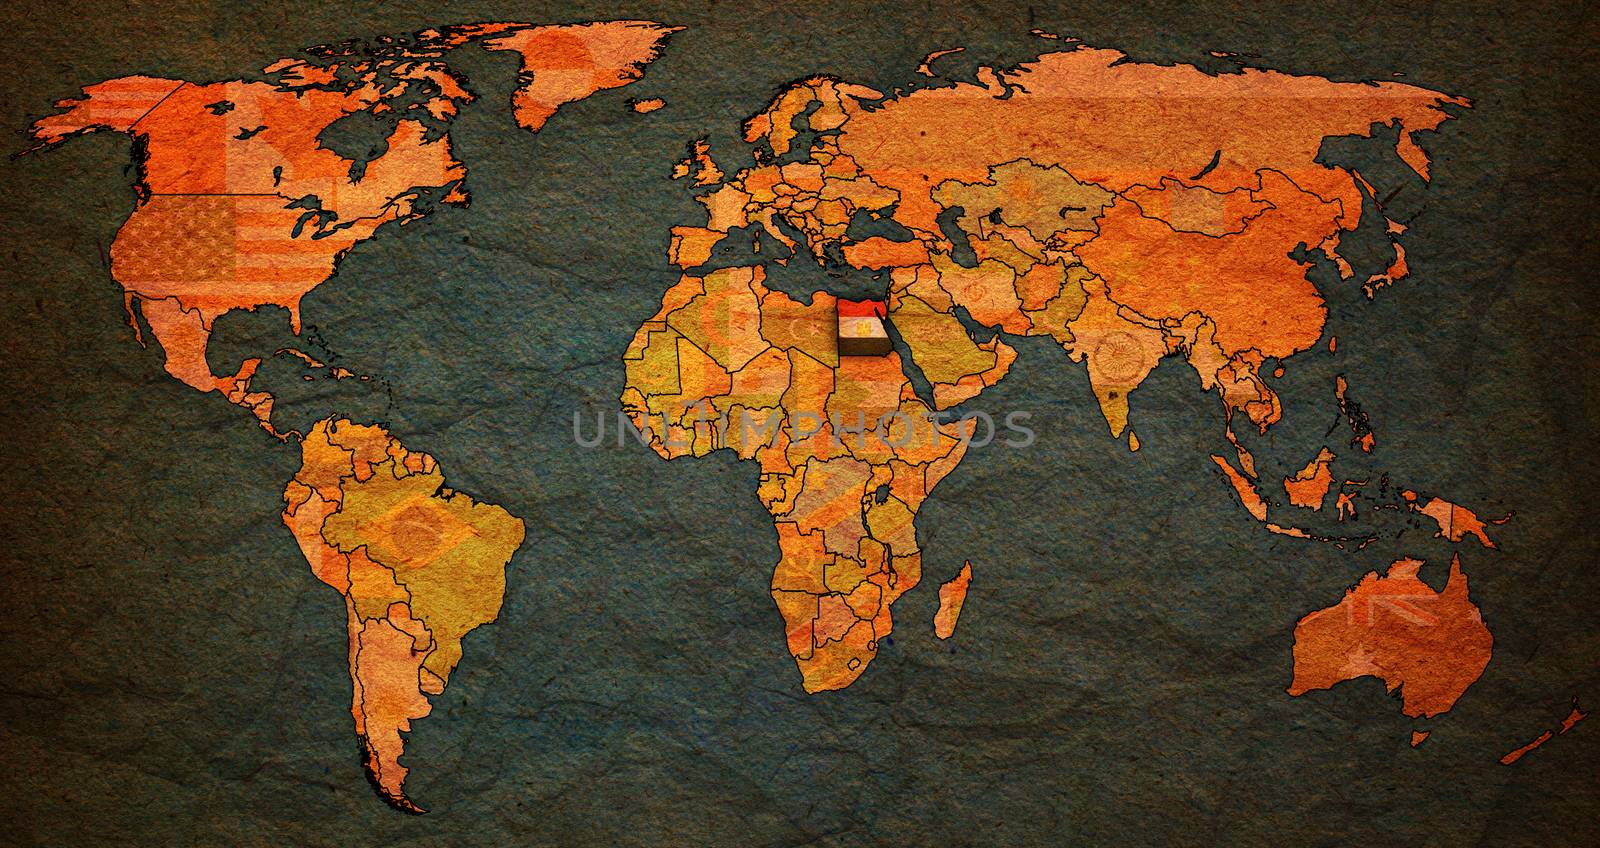 egypt flag on old vintage world map with national borders